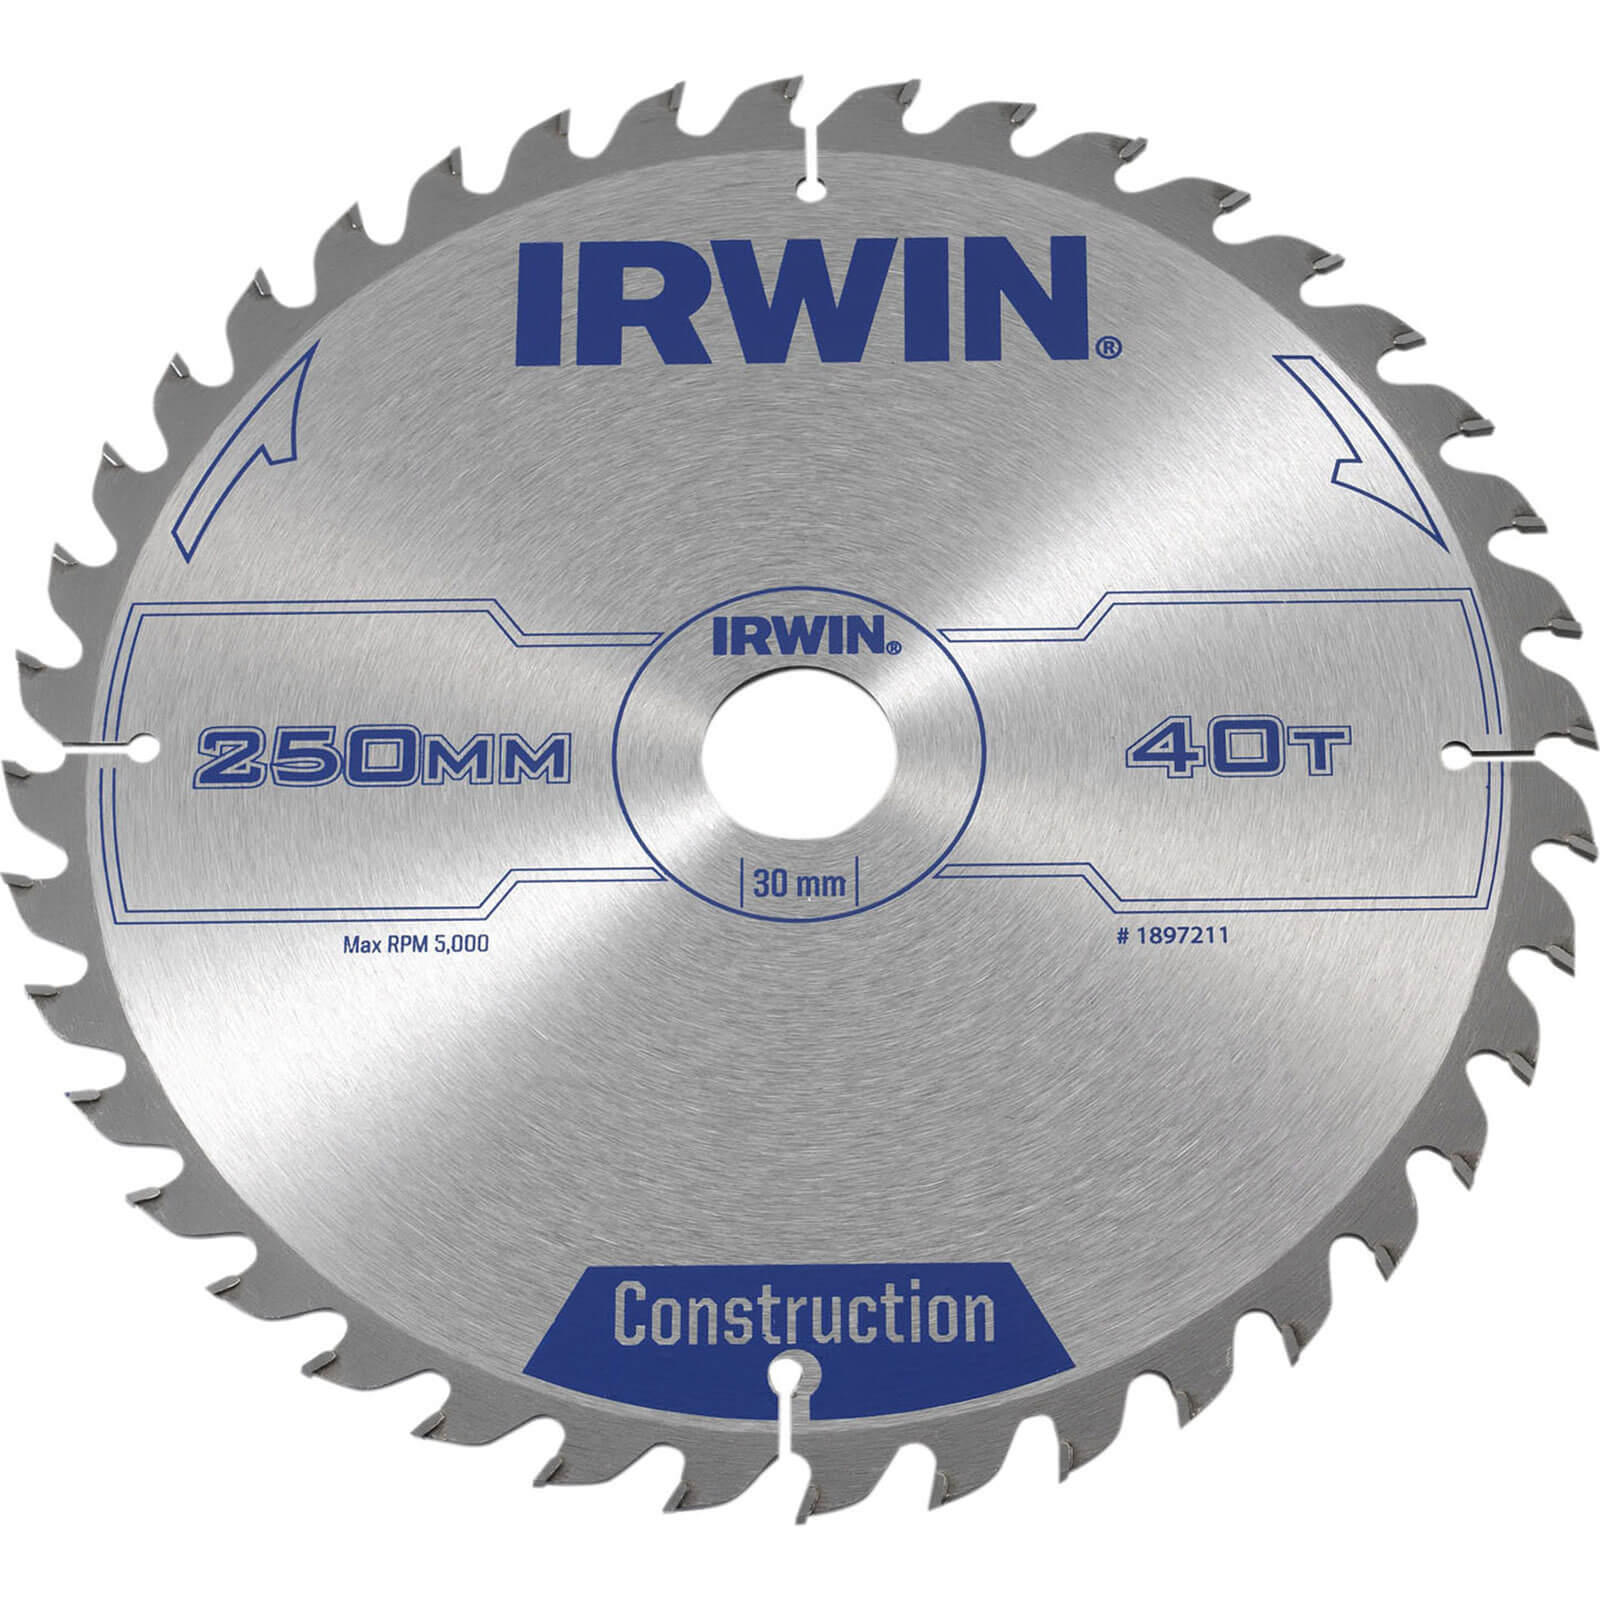 Photo of Irwin Atb Construction Circular Saw Blade 250mm 40t 30mm